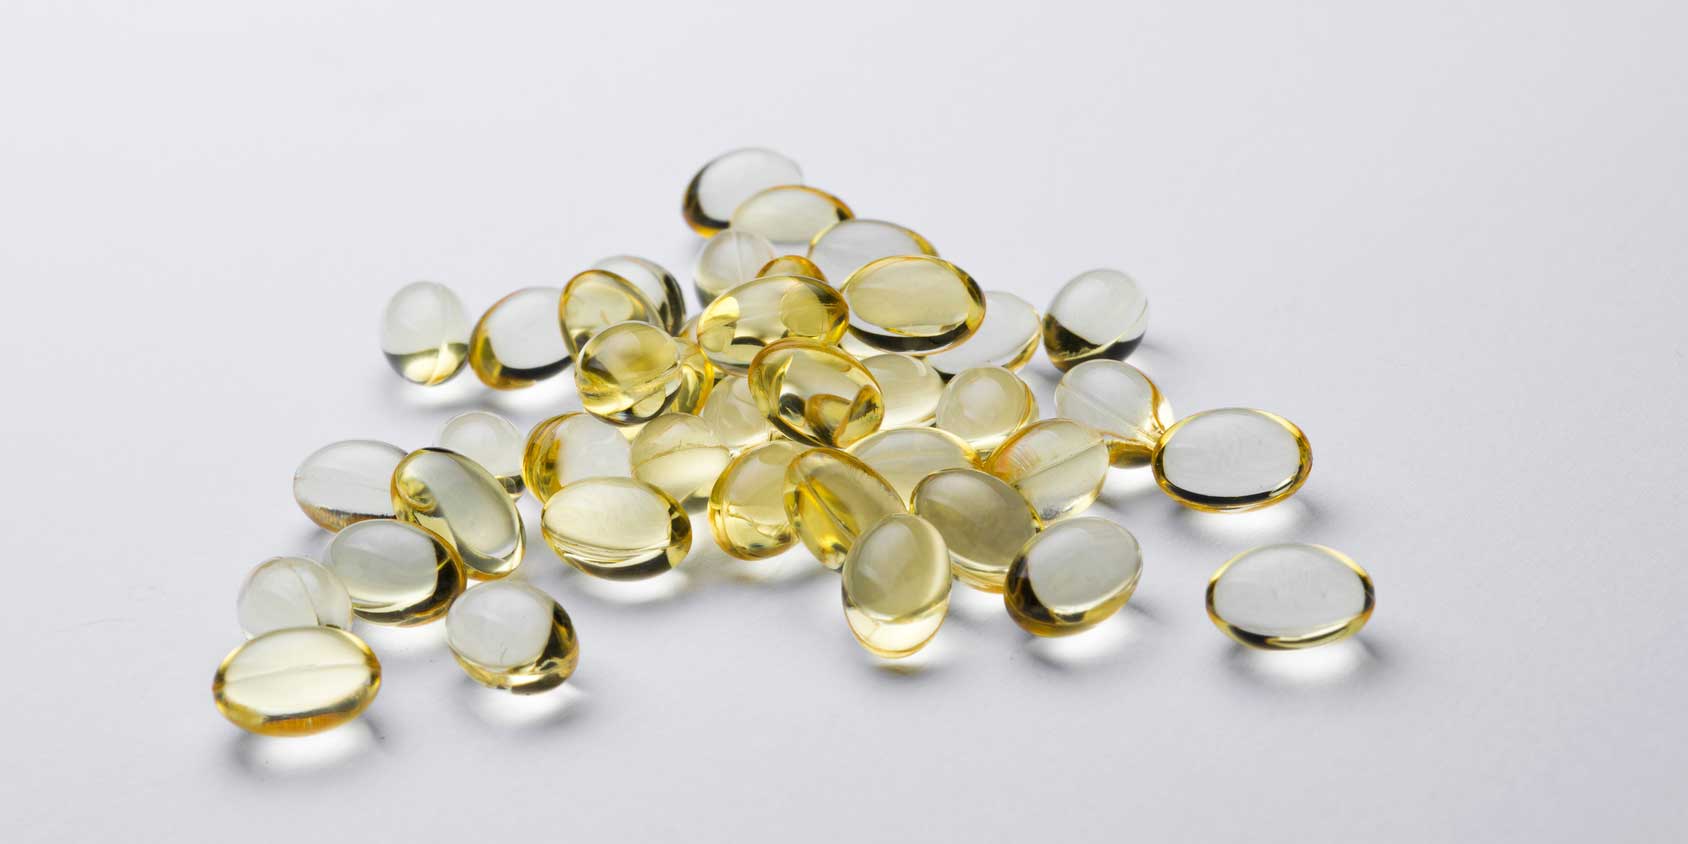 Why Does the FDA Maintain a Conspiracy of Silence about the Health Benefits of Vitamin D?